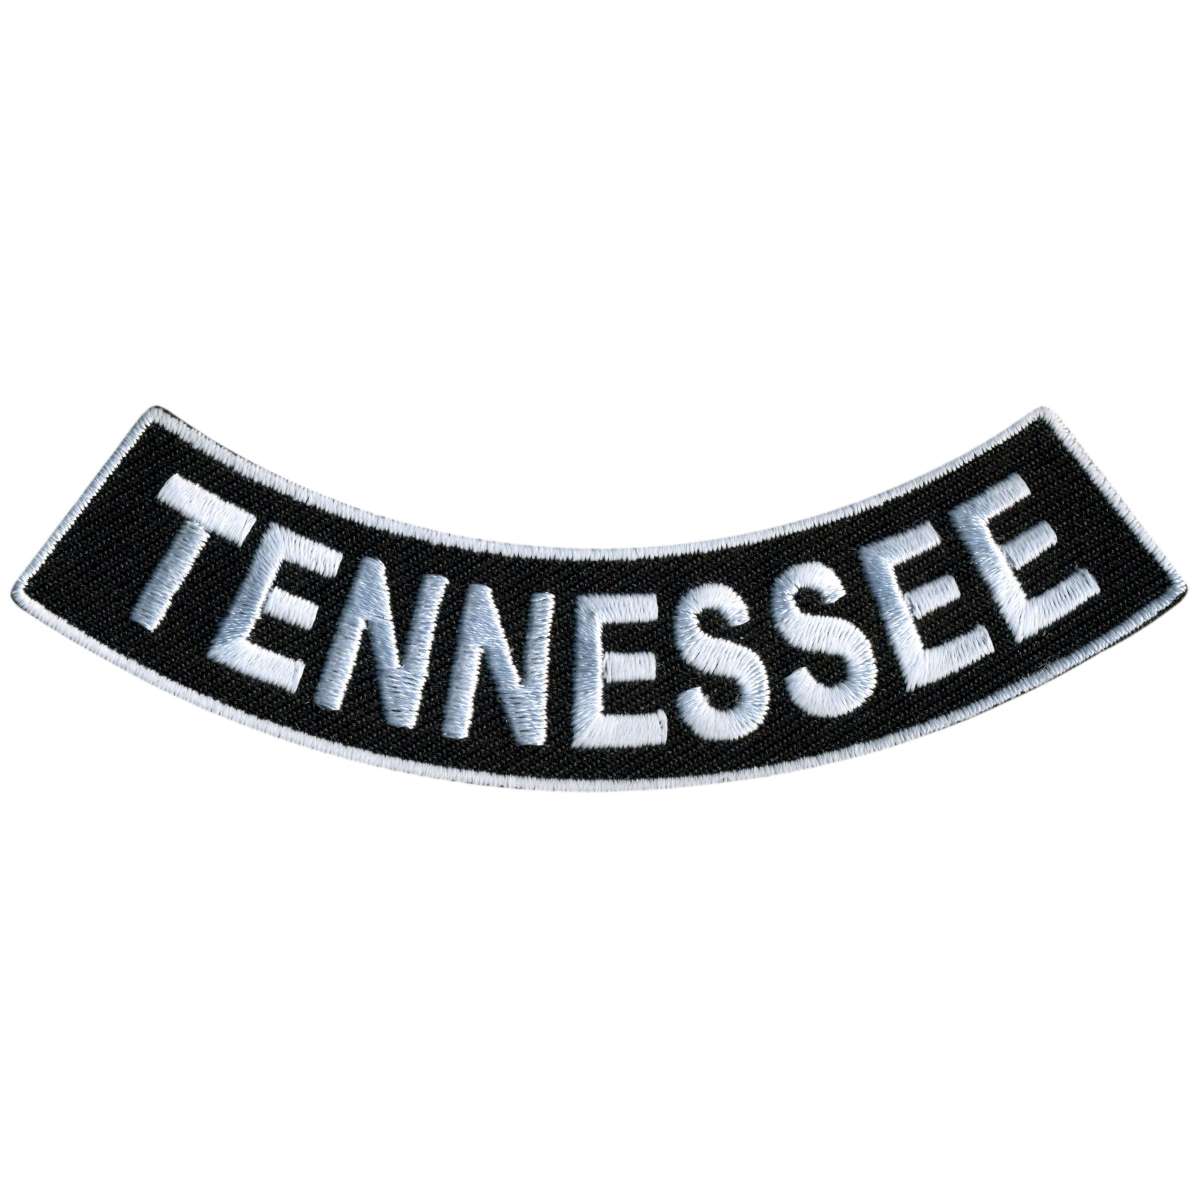 Hot Leathers Tennessee 4” X 1” Bottom Rocker Patch PPM5084